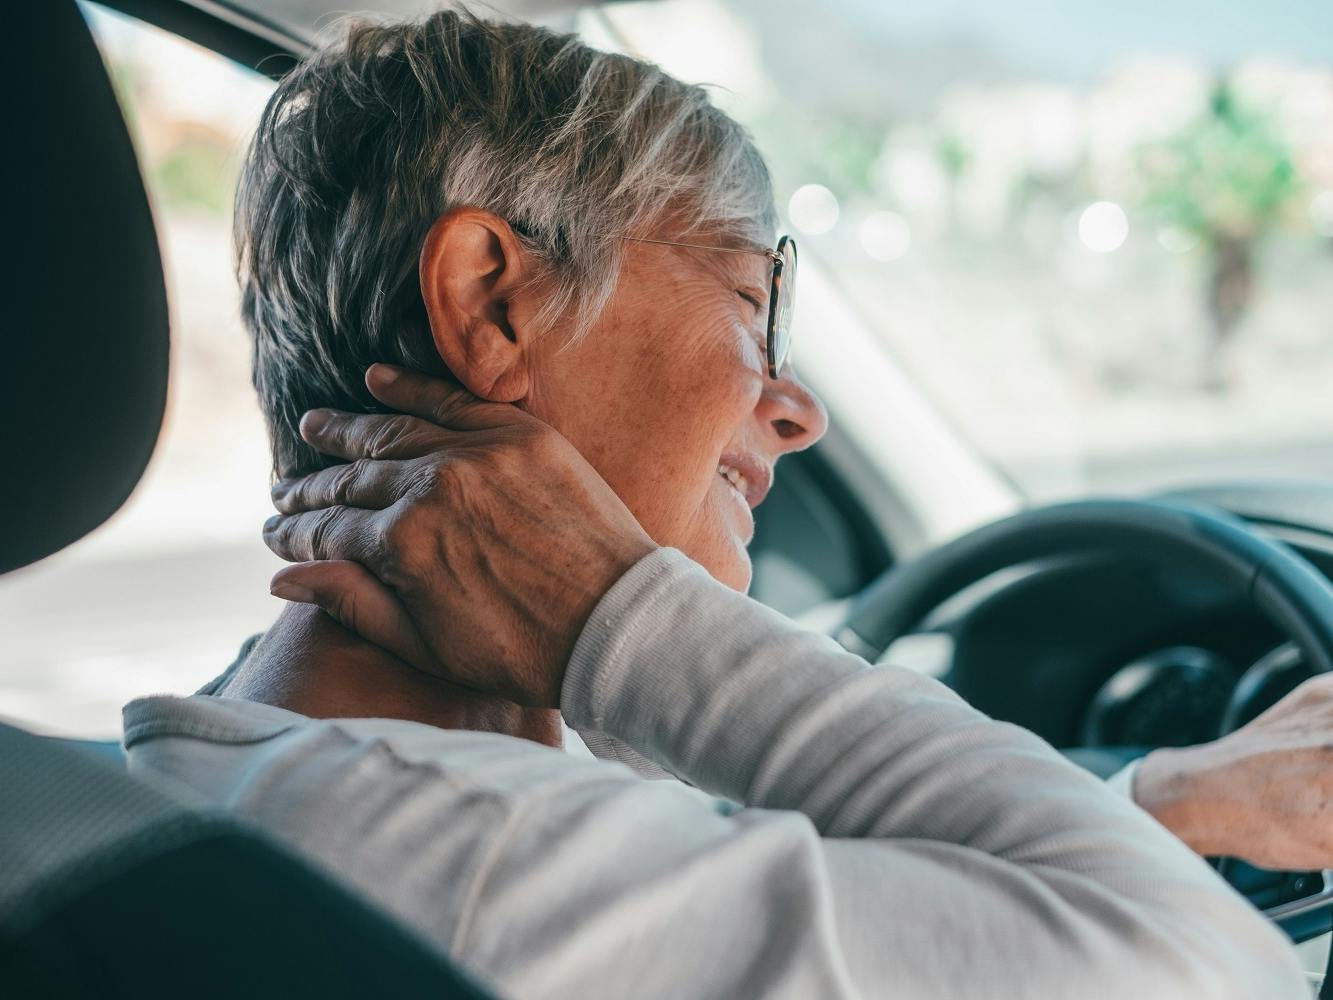 Does Medicare Cover Car Accidents?